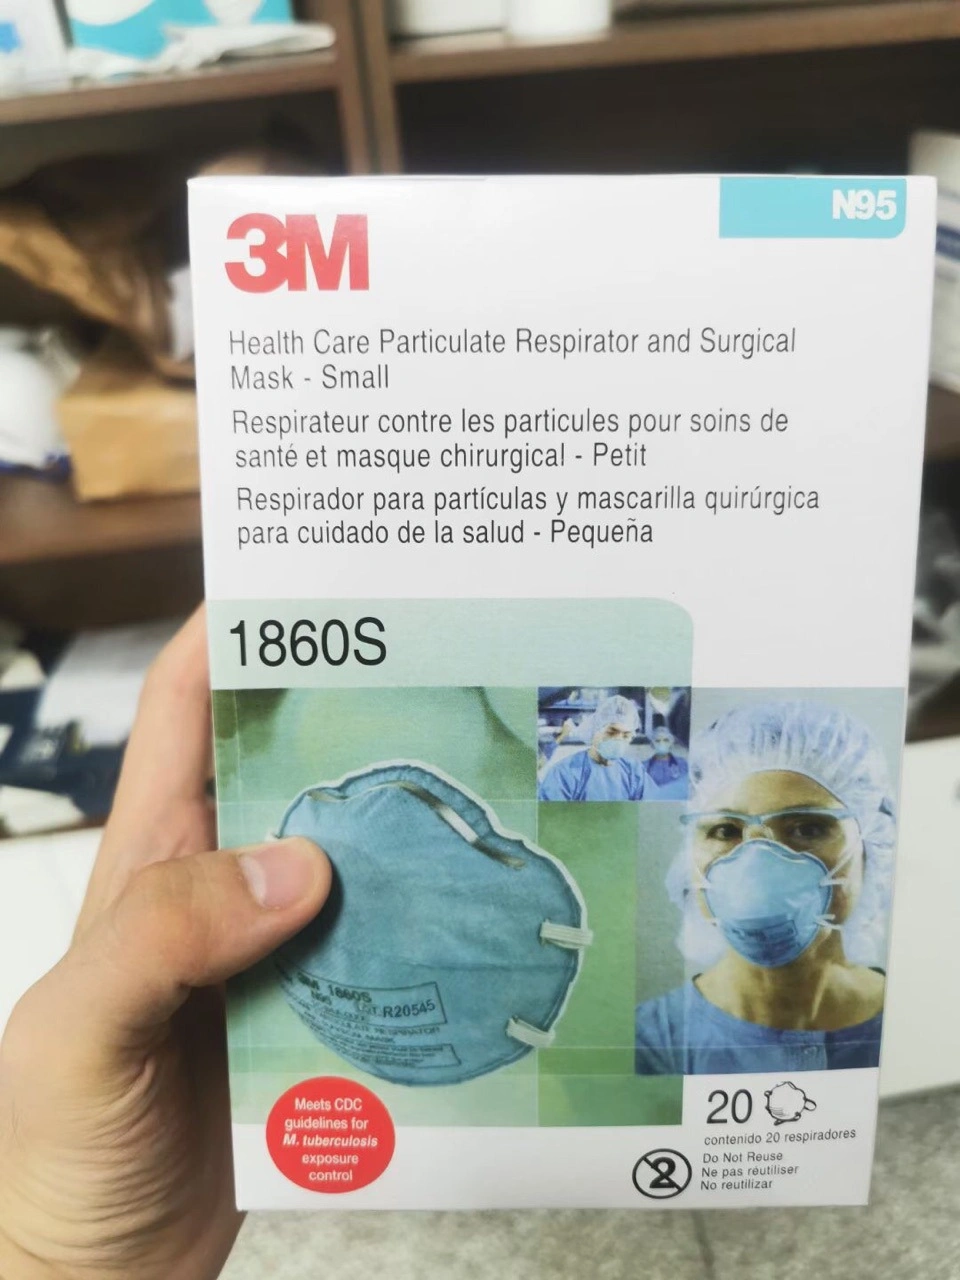 3m 8210, 1860 Face Mask and N95 Face Masks